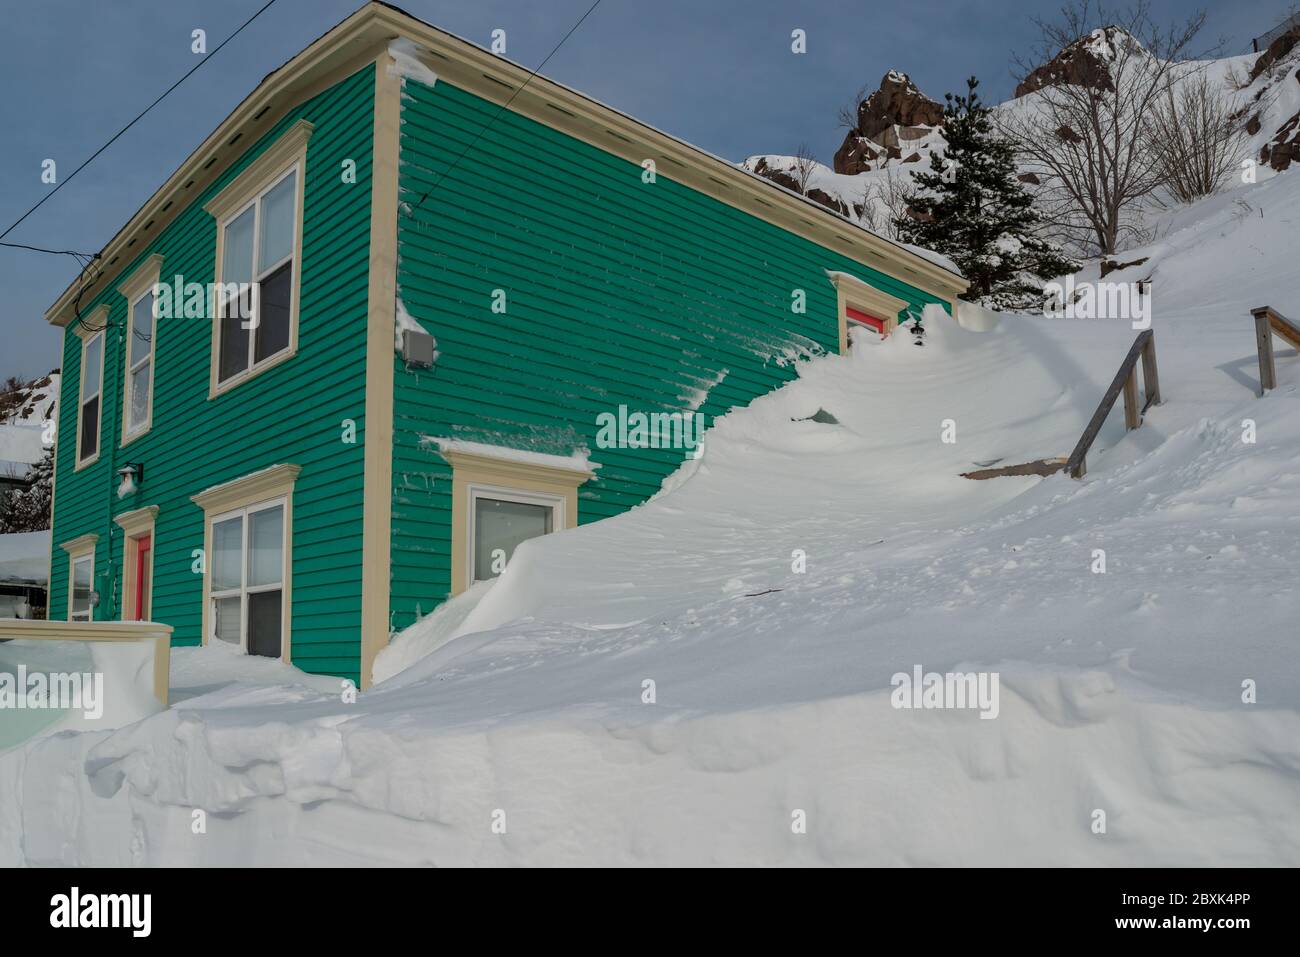 Exterior corner of a green wooden building with narrow clapboard and cream coloured trim. The windows are double hung. There's drifts of snow. Stock Photo